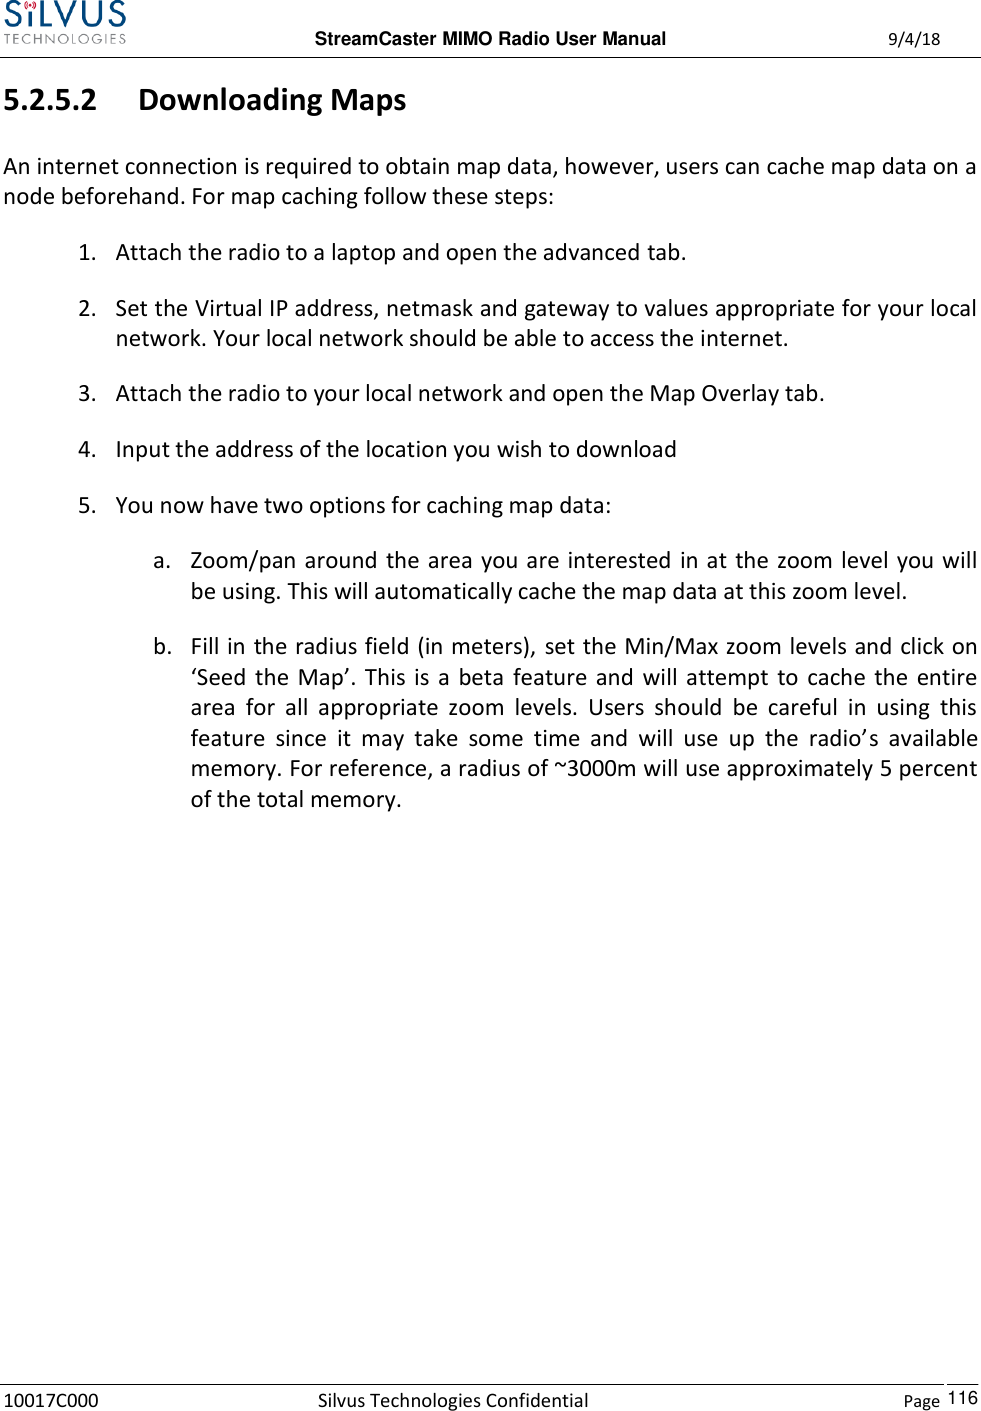  StreamCaster MIMO Radio User Manual  9/4/18 10017C000 Silvus Technologies Confidential    Page    116 5.2.5.2 Downloading Maps An internet connection is required to obtain map data, however, users can cache map data on a node beforehand. For map caching follow these steps: 1. Attach the radio to a laptop and open the advanced tab. 2. Set the Virtual IP address, netmask and gateway to values appropriate for your local network. Your local network should be able to access the internet. 3. Attach the radio to your local network and open the Map Overlay tab. 4. Input the address of the location you wish to download 5. You now have two options for caching map data: a. Zoom/pan around  the area you are interested in at the zoom level you will be using. This will automatically cache the map data at this zoom level. b. Fill in the radius field (in meters), set the Min/Max zoom levels and click on ‘Seed  the  Map’.  This  is  a  beta  feature and  will attempt  to  cache  the  entire area  for  all  appropriate  zoom  levels.  Users  should  be  careful  in  using  this feature  since  it  may  take  some  time  and  will  use  up  the  radio’s  available memory. For reference, a radius of ~3000m will use approximately 5 percent of the total memory.          